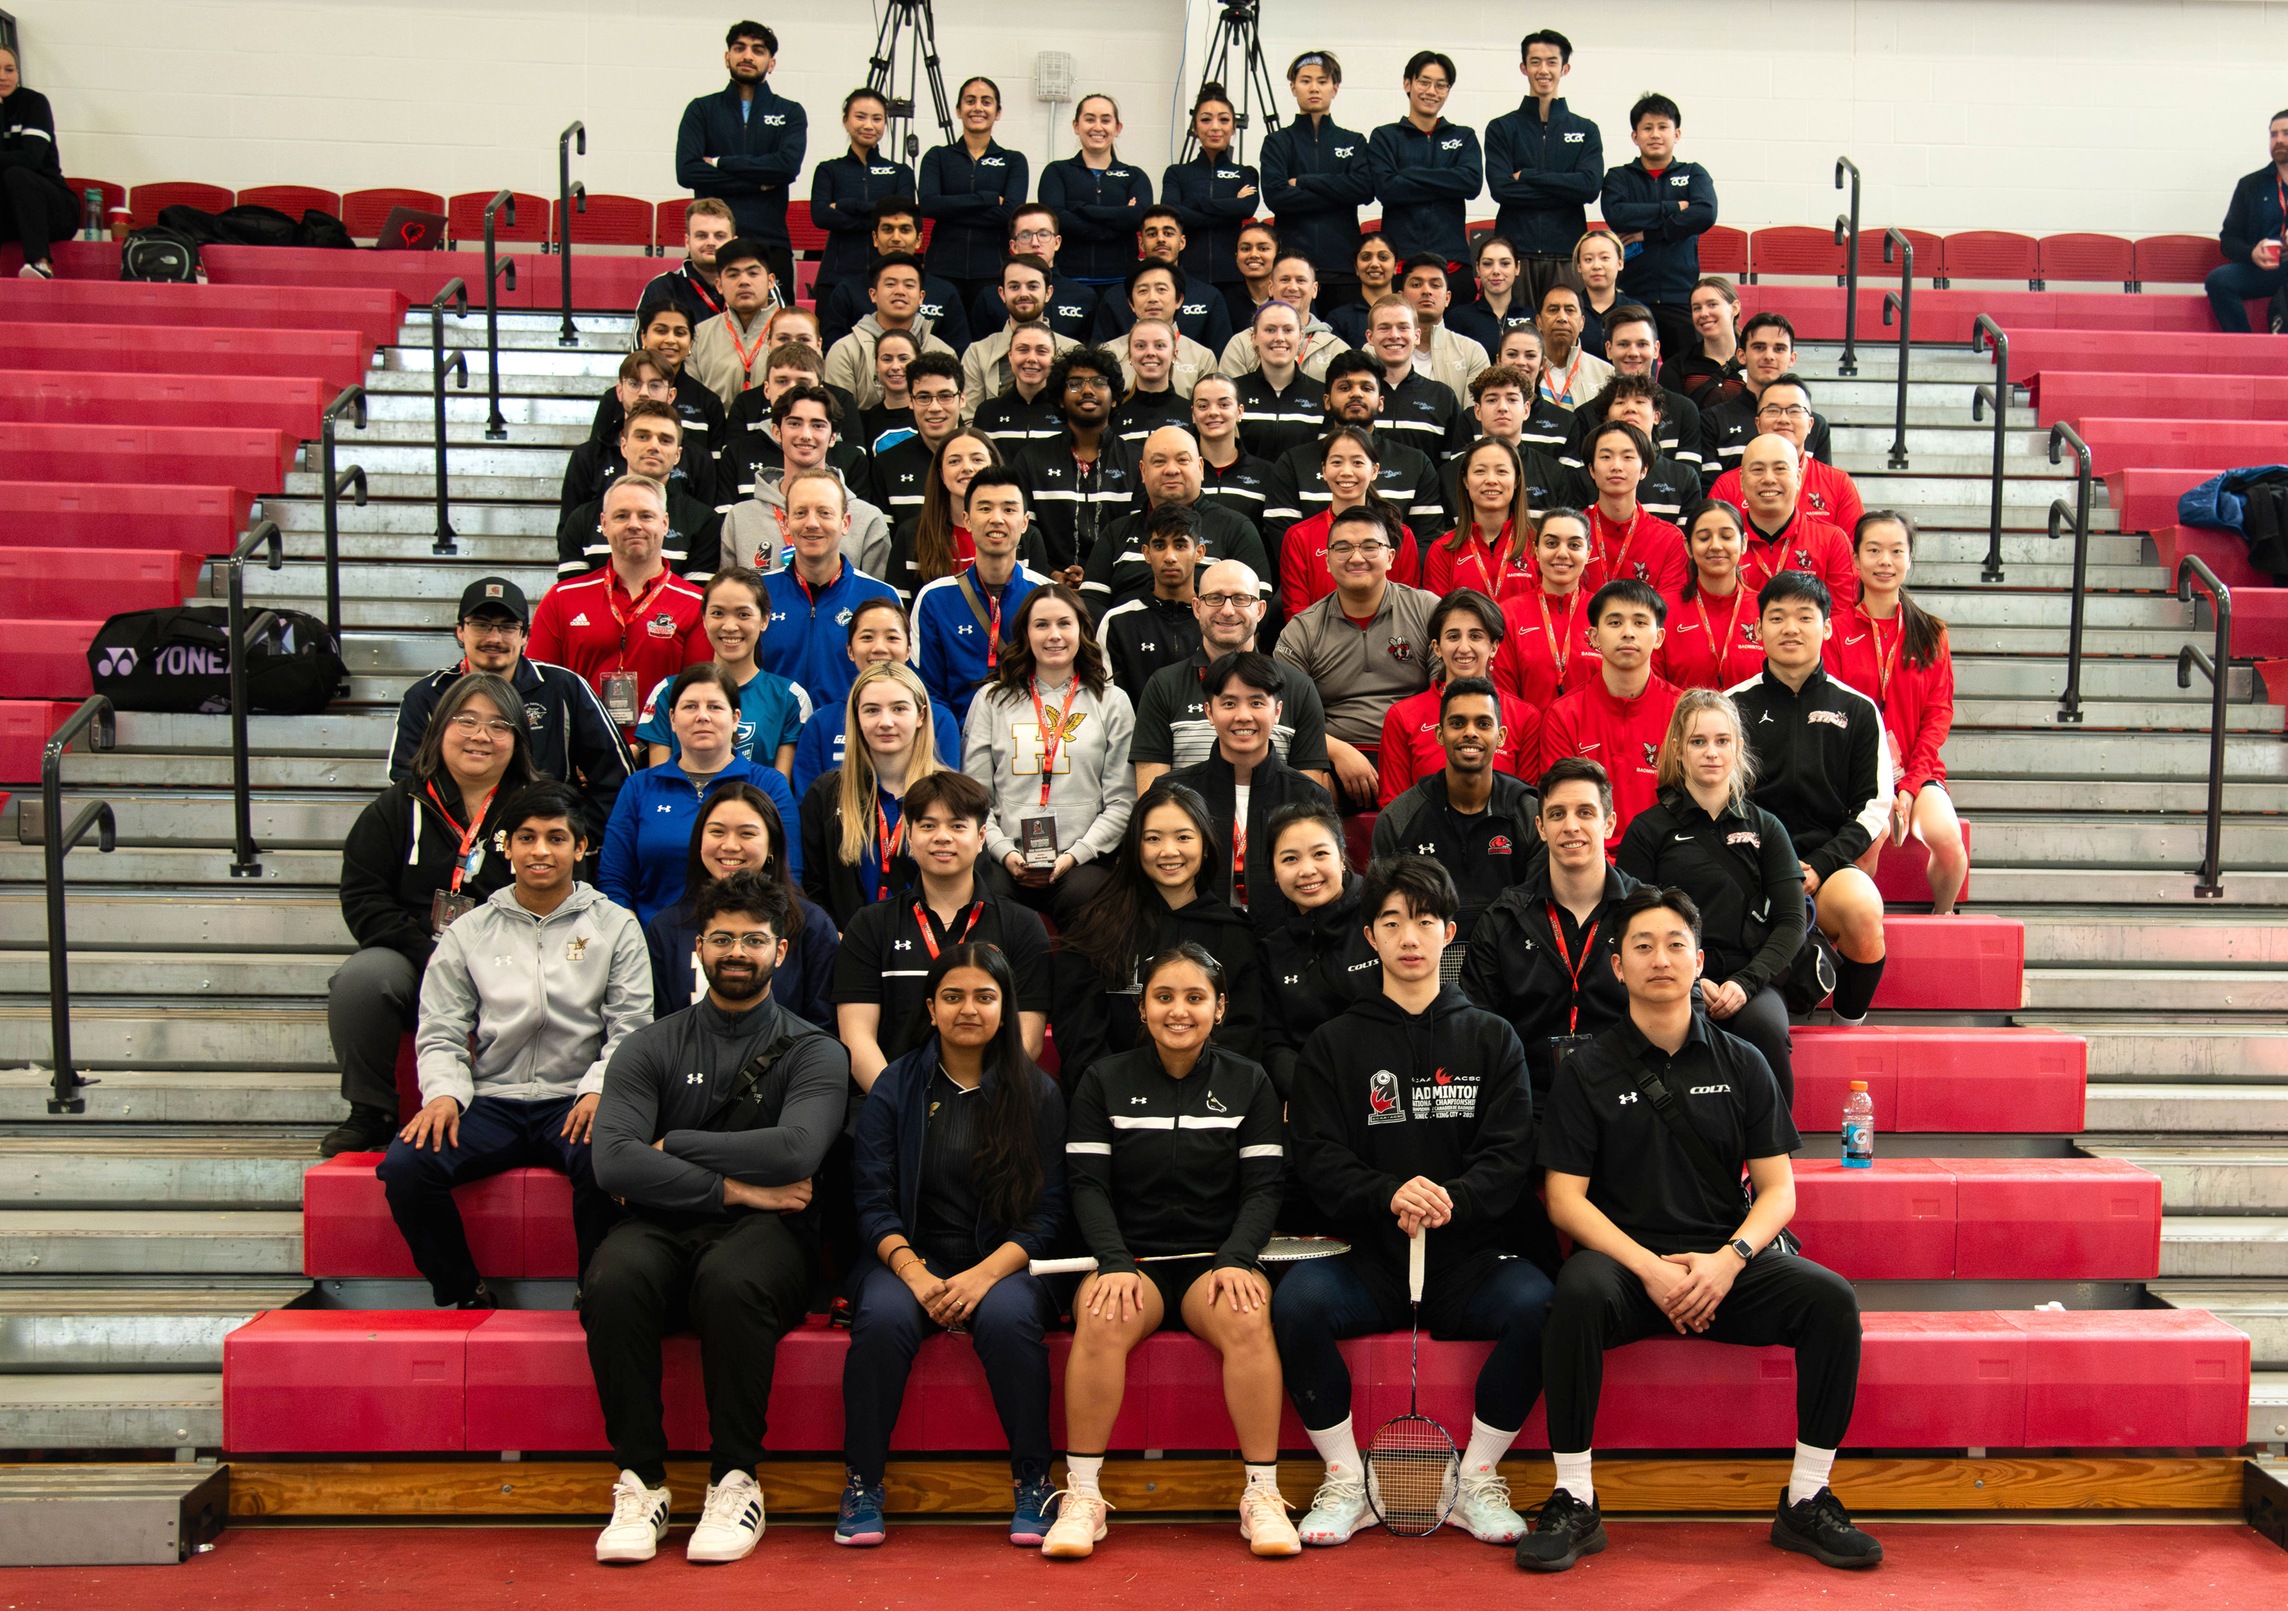 CCAA Badminton: Shah and Zhou Well-Positioned to Defend Championships